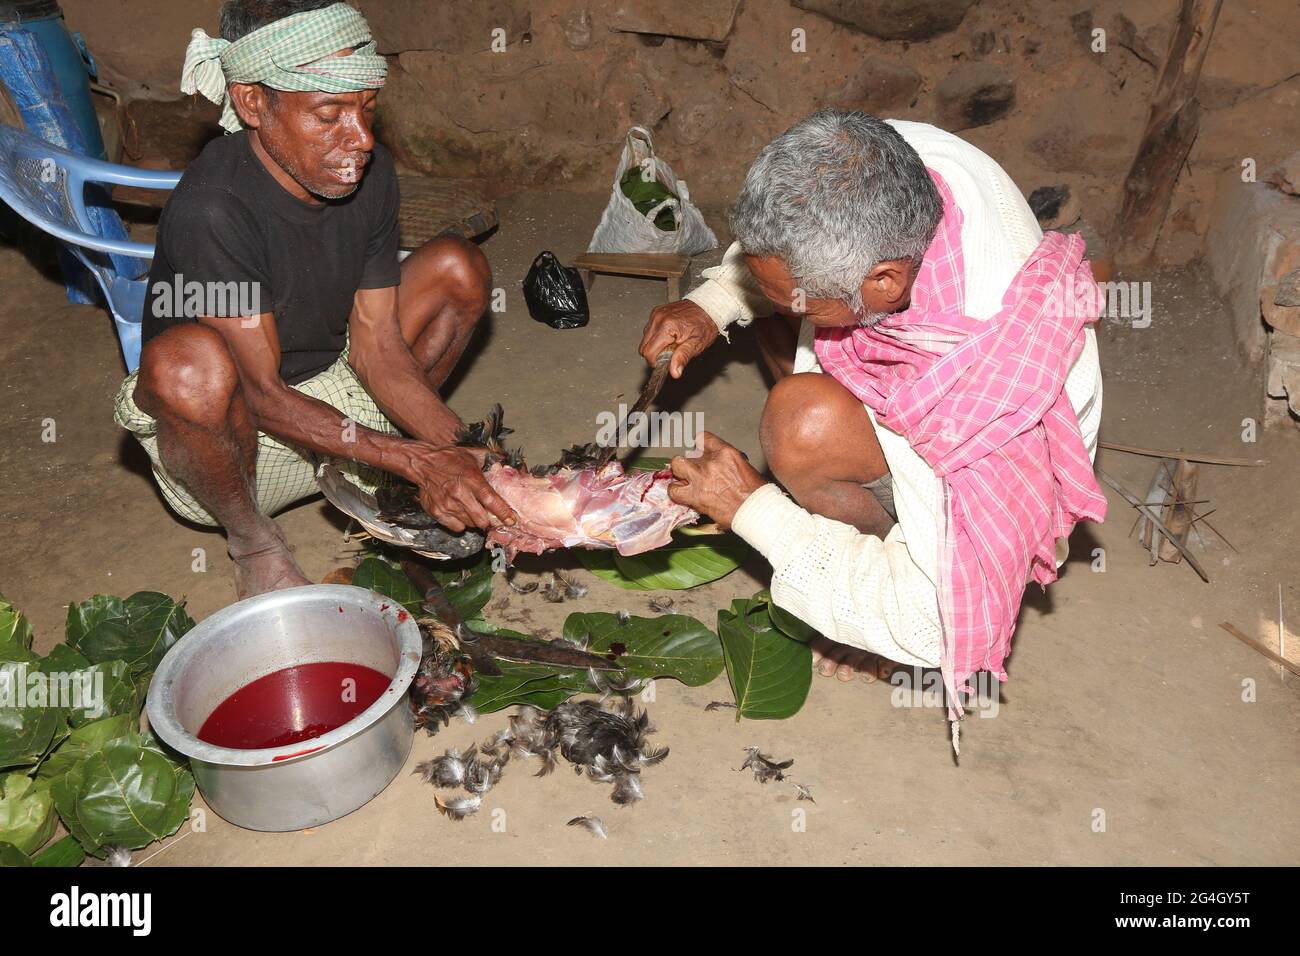 LANJIA SAORA TRIBE. Sacrificing a cock is one of the ritual of Idital ceremony. Puttasingh village in Odisha, India Stock Photo